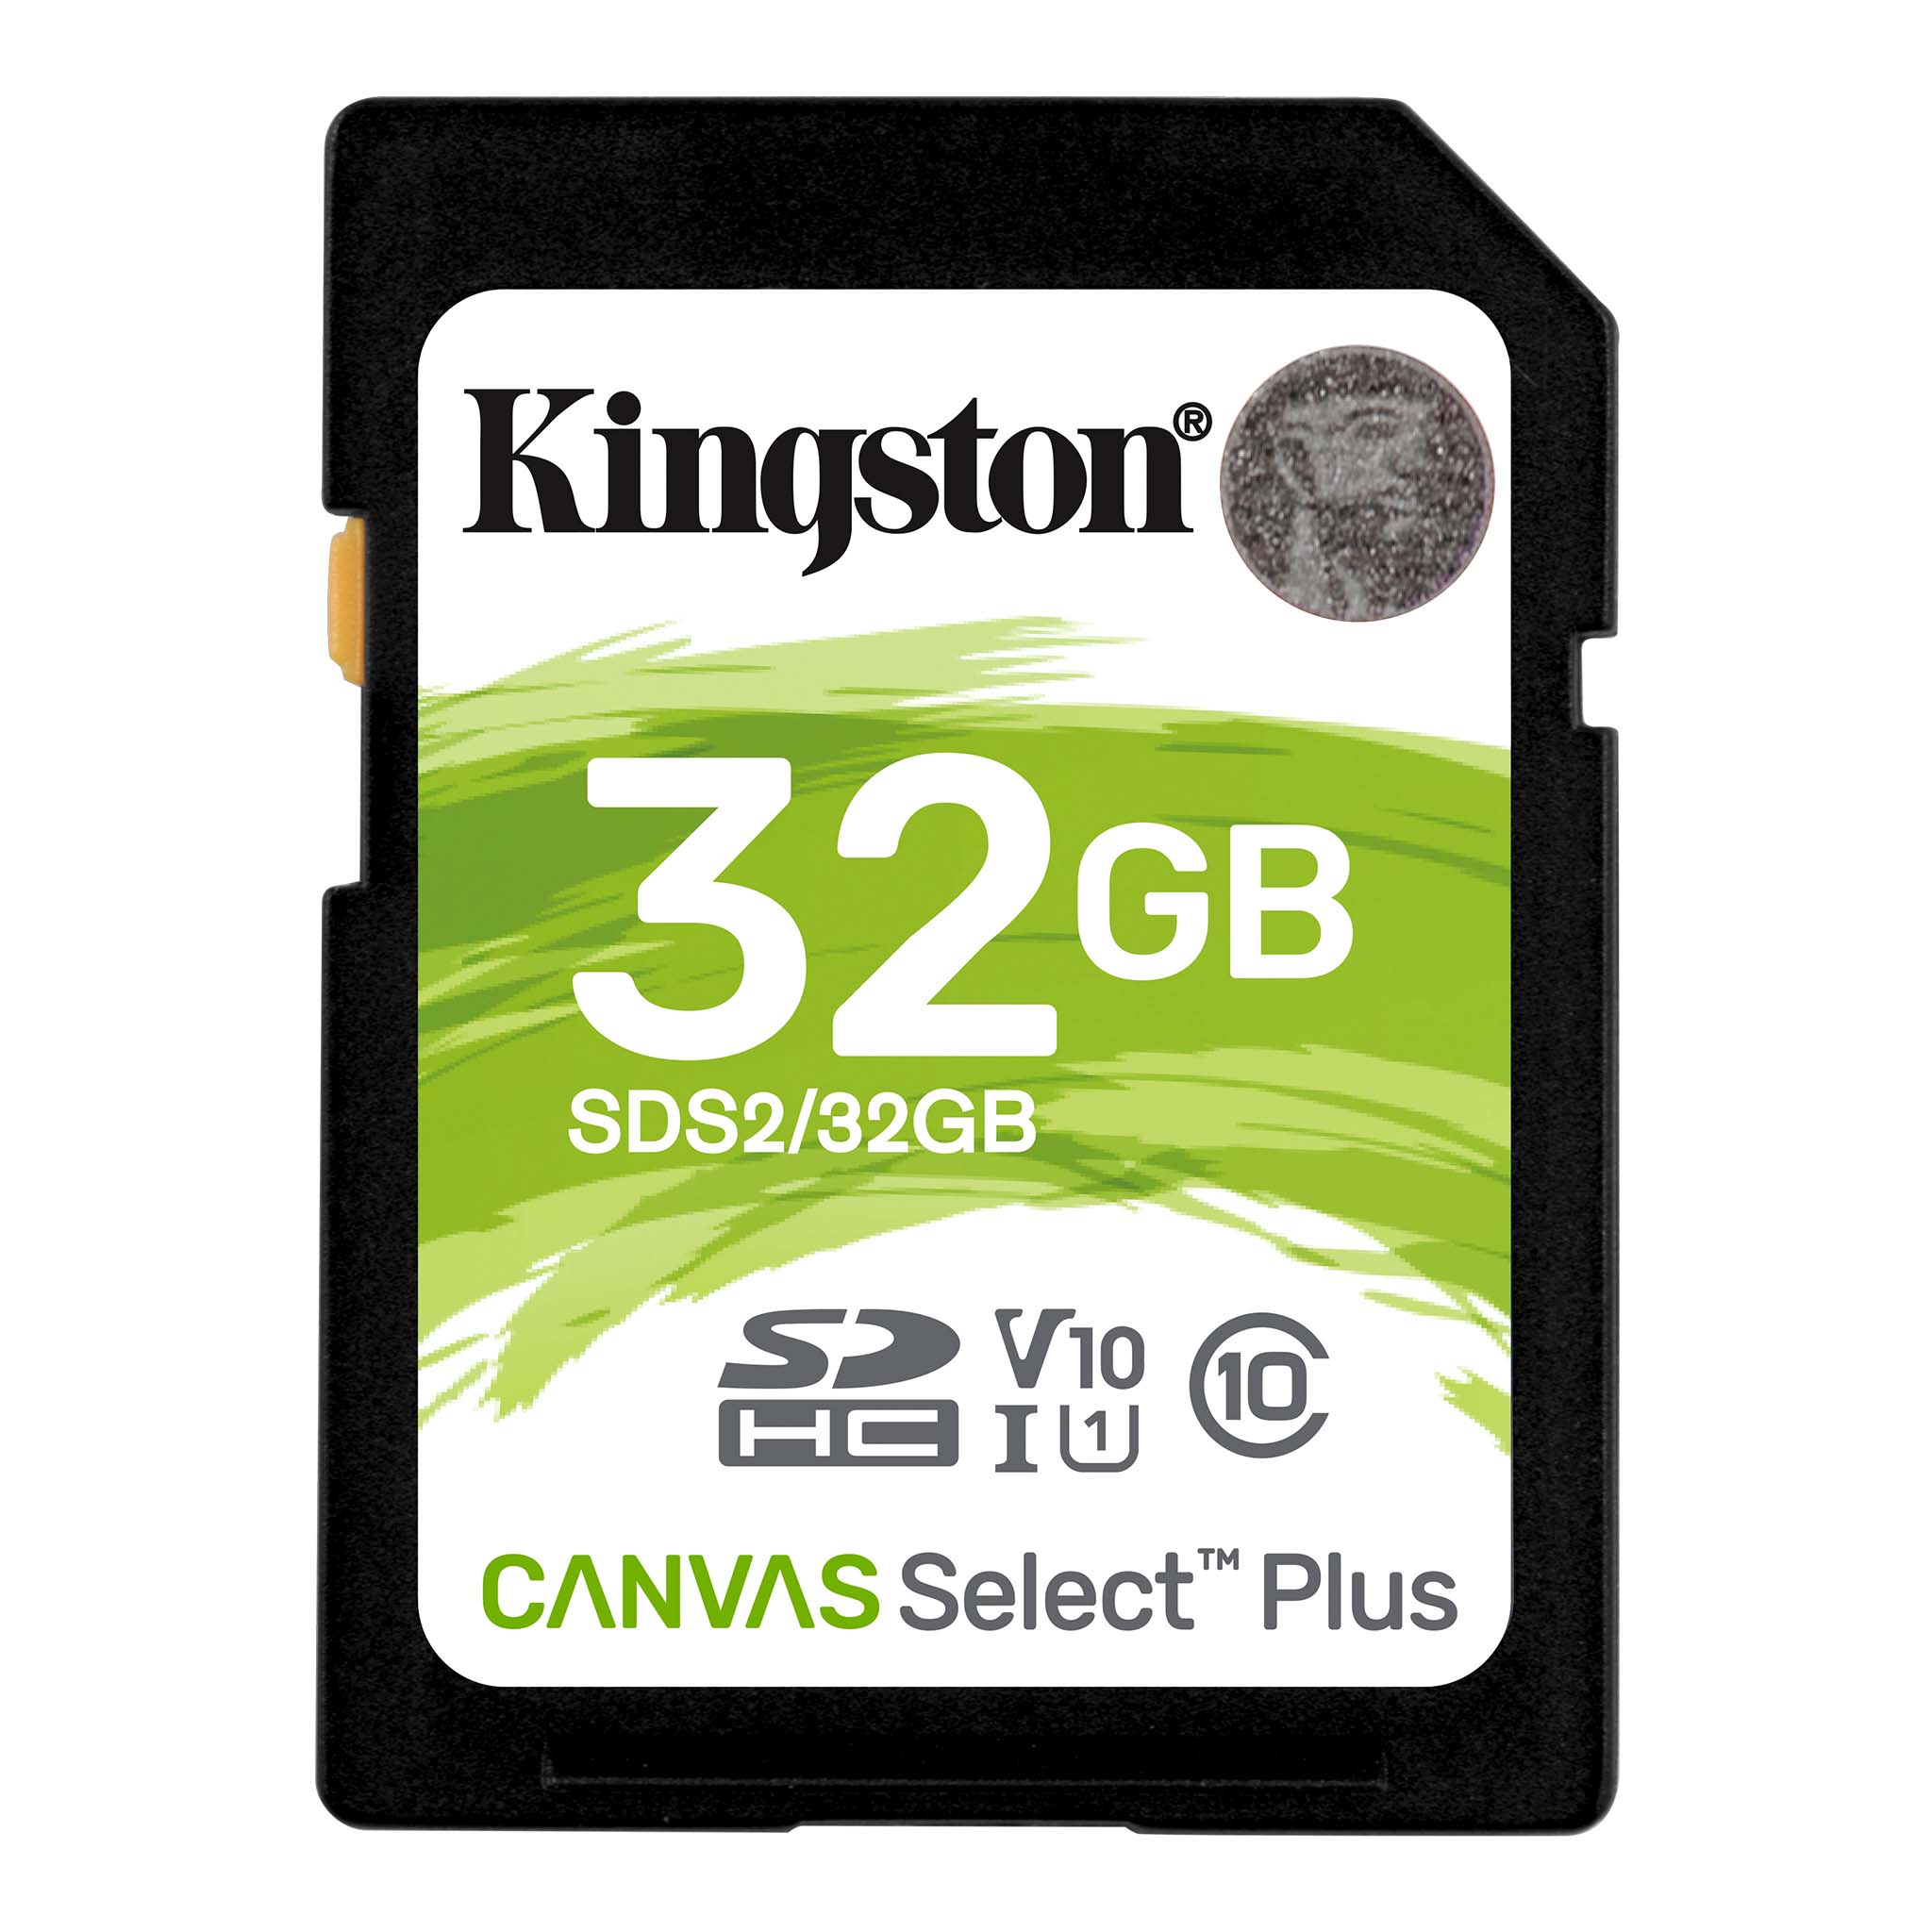 100MBs Works with Kingston Kingston 128GB Microsoft Surface Pro 4 MicroSDXC Canvas Select Plus Card Verified by SanFlash. 